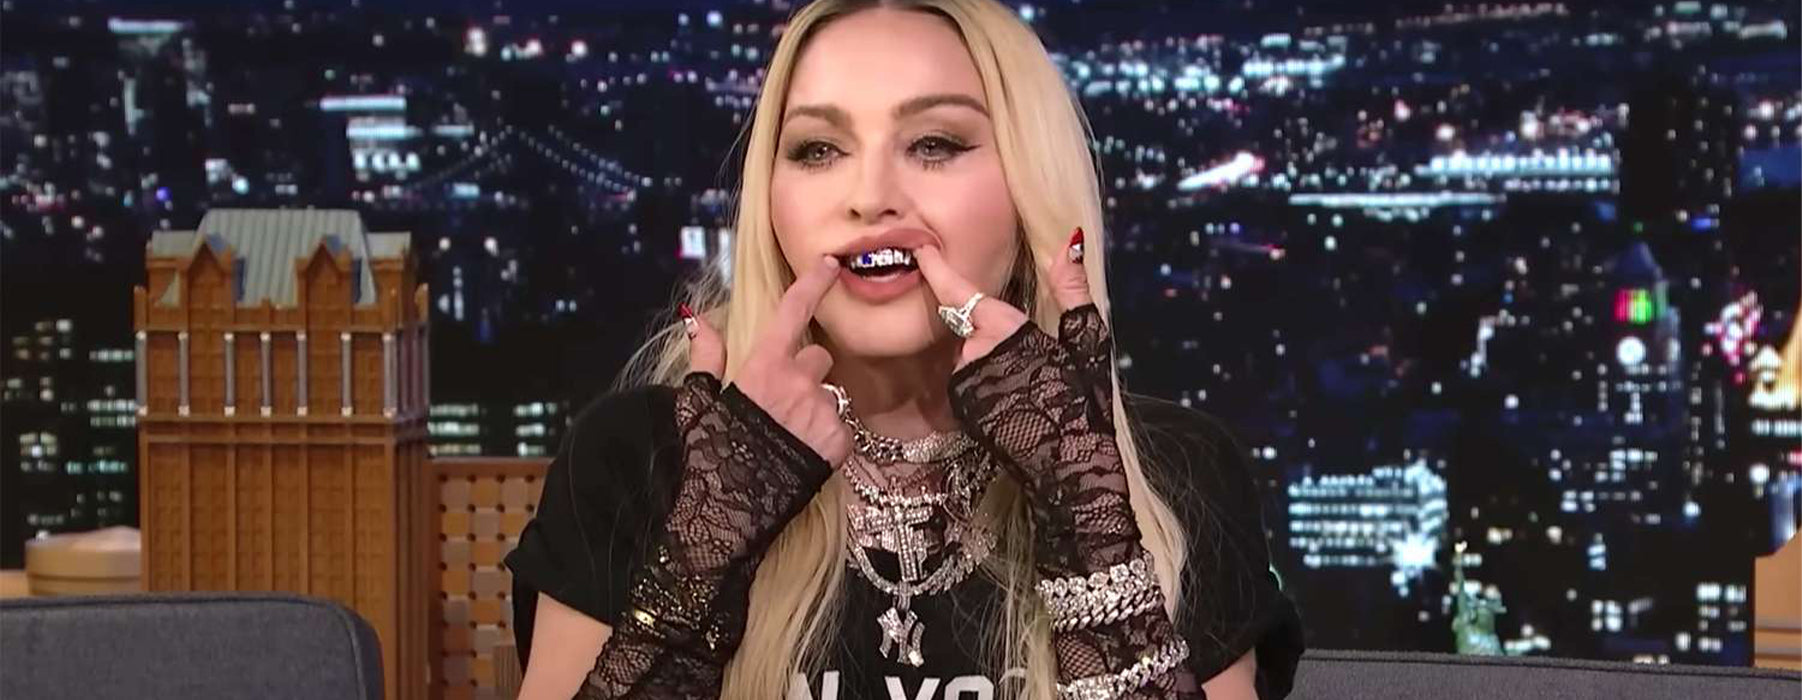 Tooth gems Madonna  wearing gold grillz